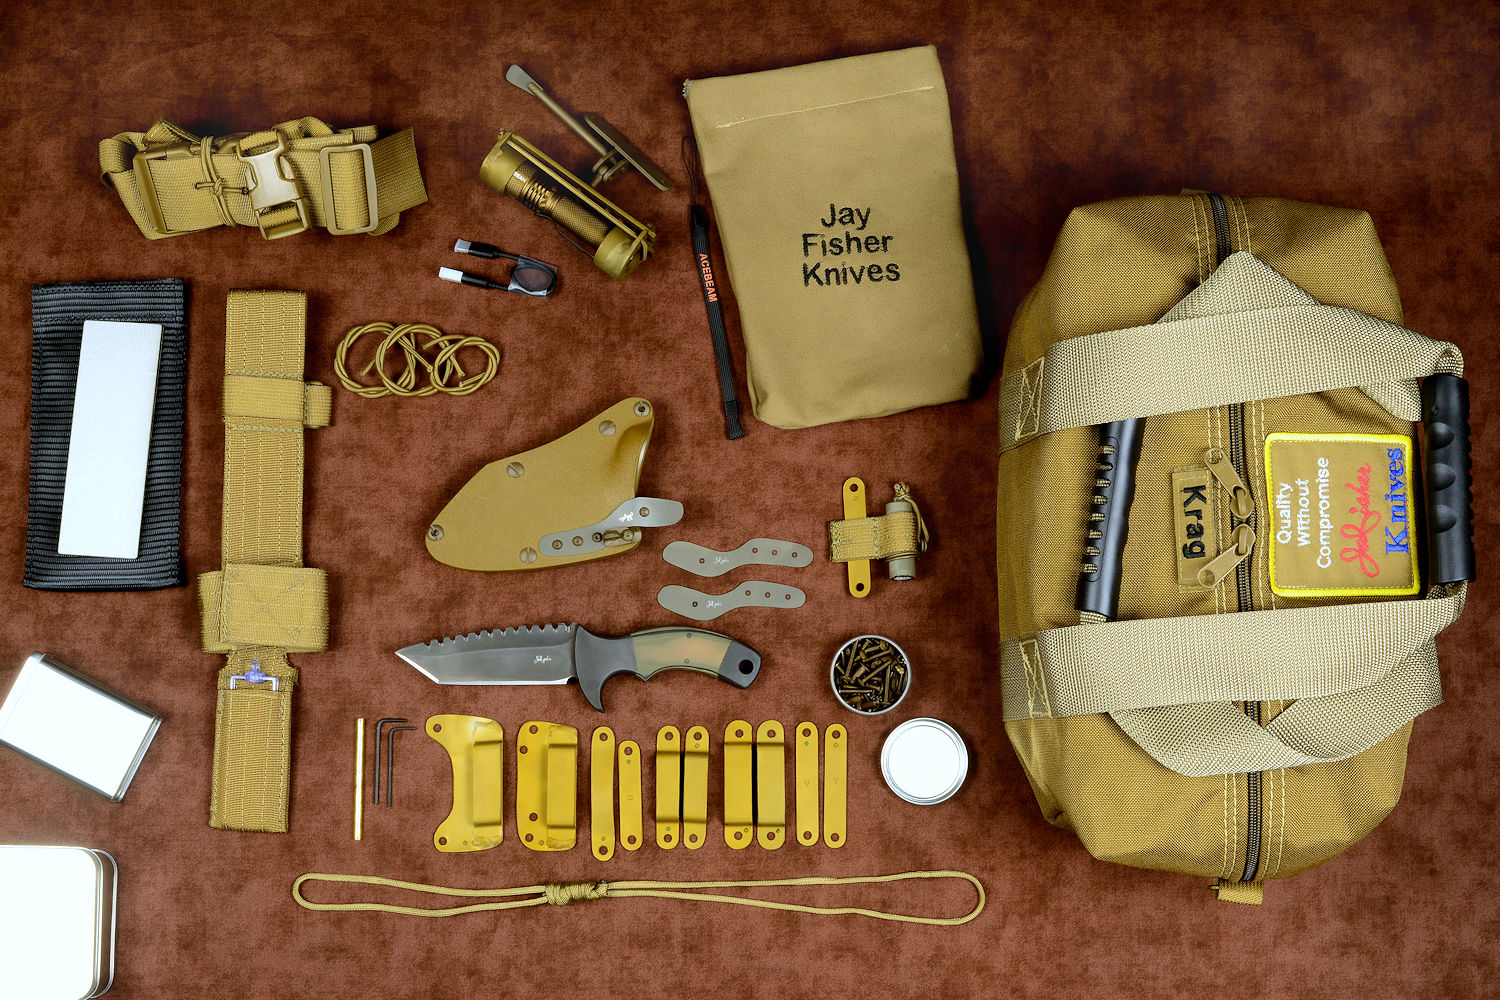 "Krag" tactical knife kit, complete, with UBLX, EXBLX, HULA, LIMA, diamond sharpener, leather sheath, sternum harness, lanyards, staps, clamps, hardware, and heavy ballistic nylon duffle